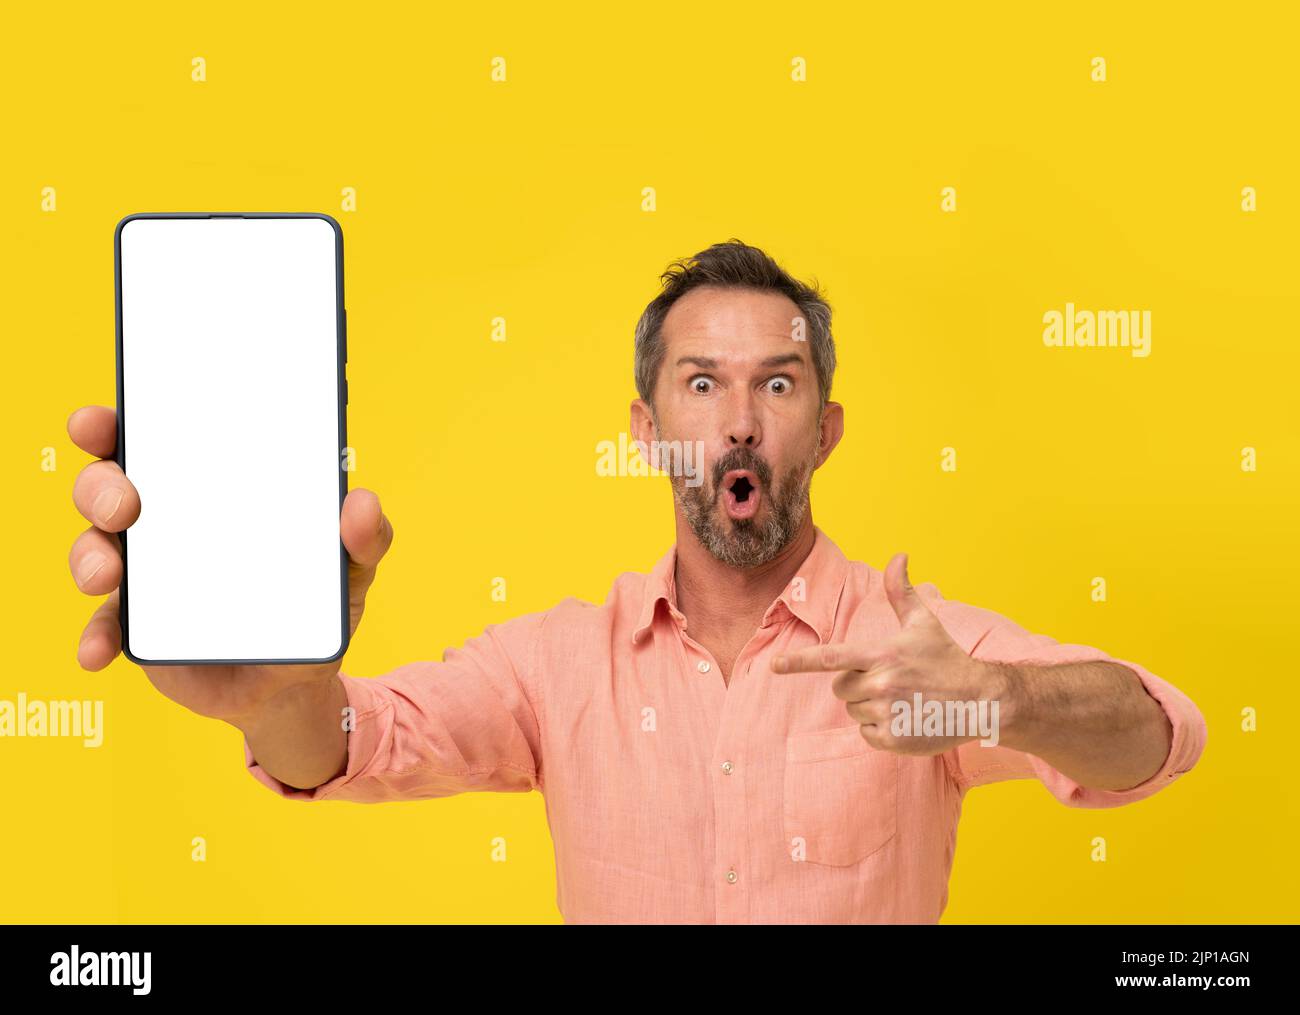 Amazed middle aged grey haired man pointing finger at smartphone looking at camera wearing peach shirt isolated on yellow. Mature fit man with phone app advertisement. Mock up white screen.  Stock Photo